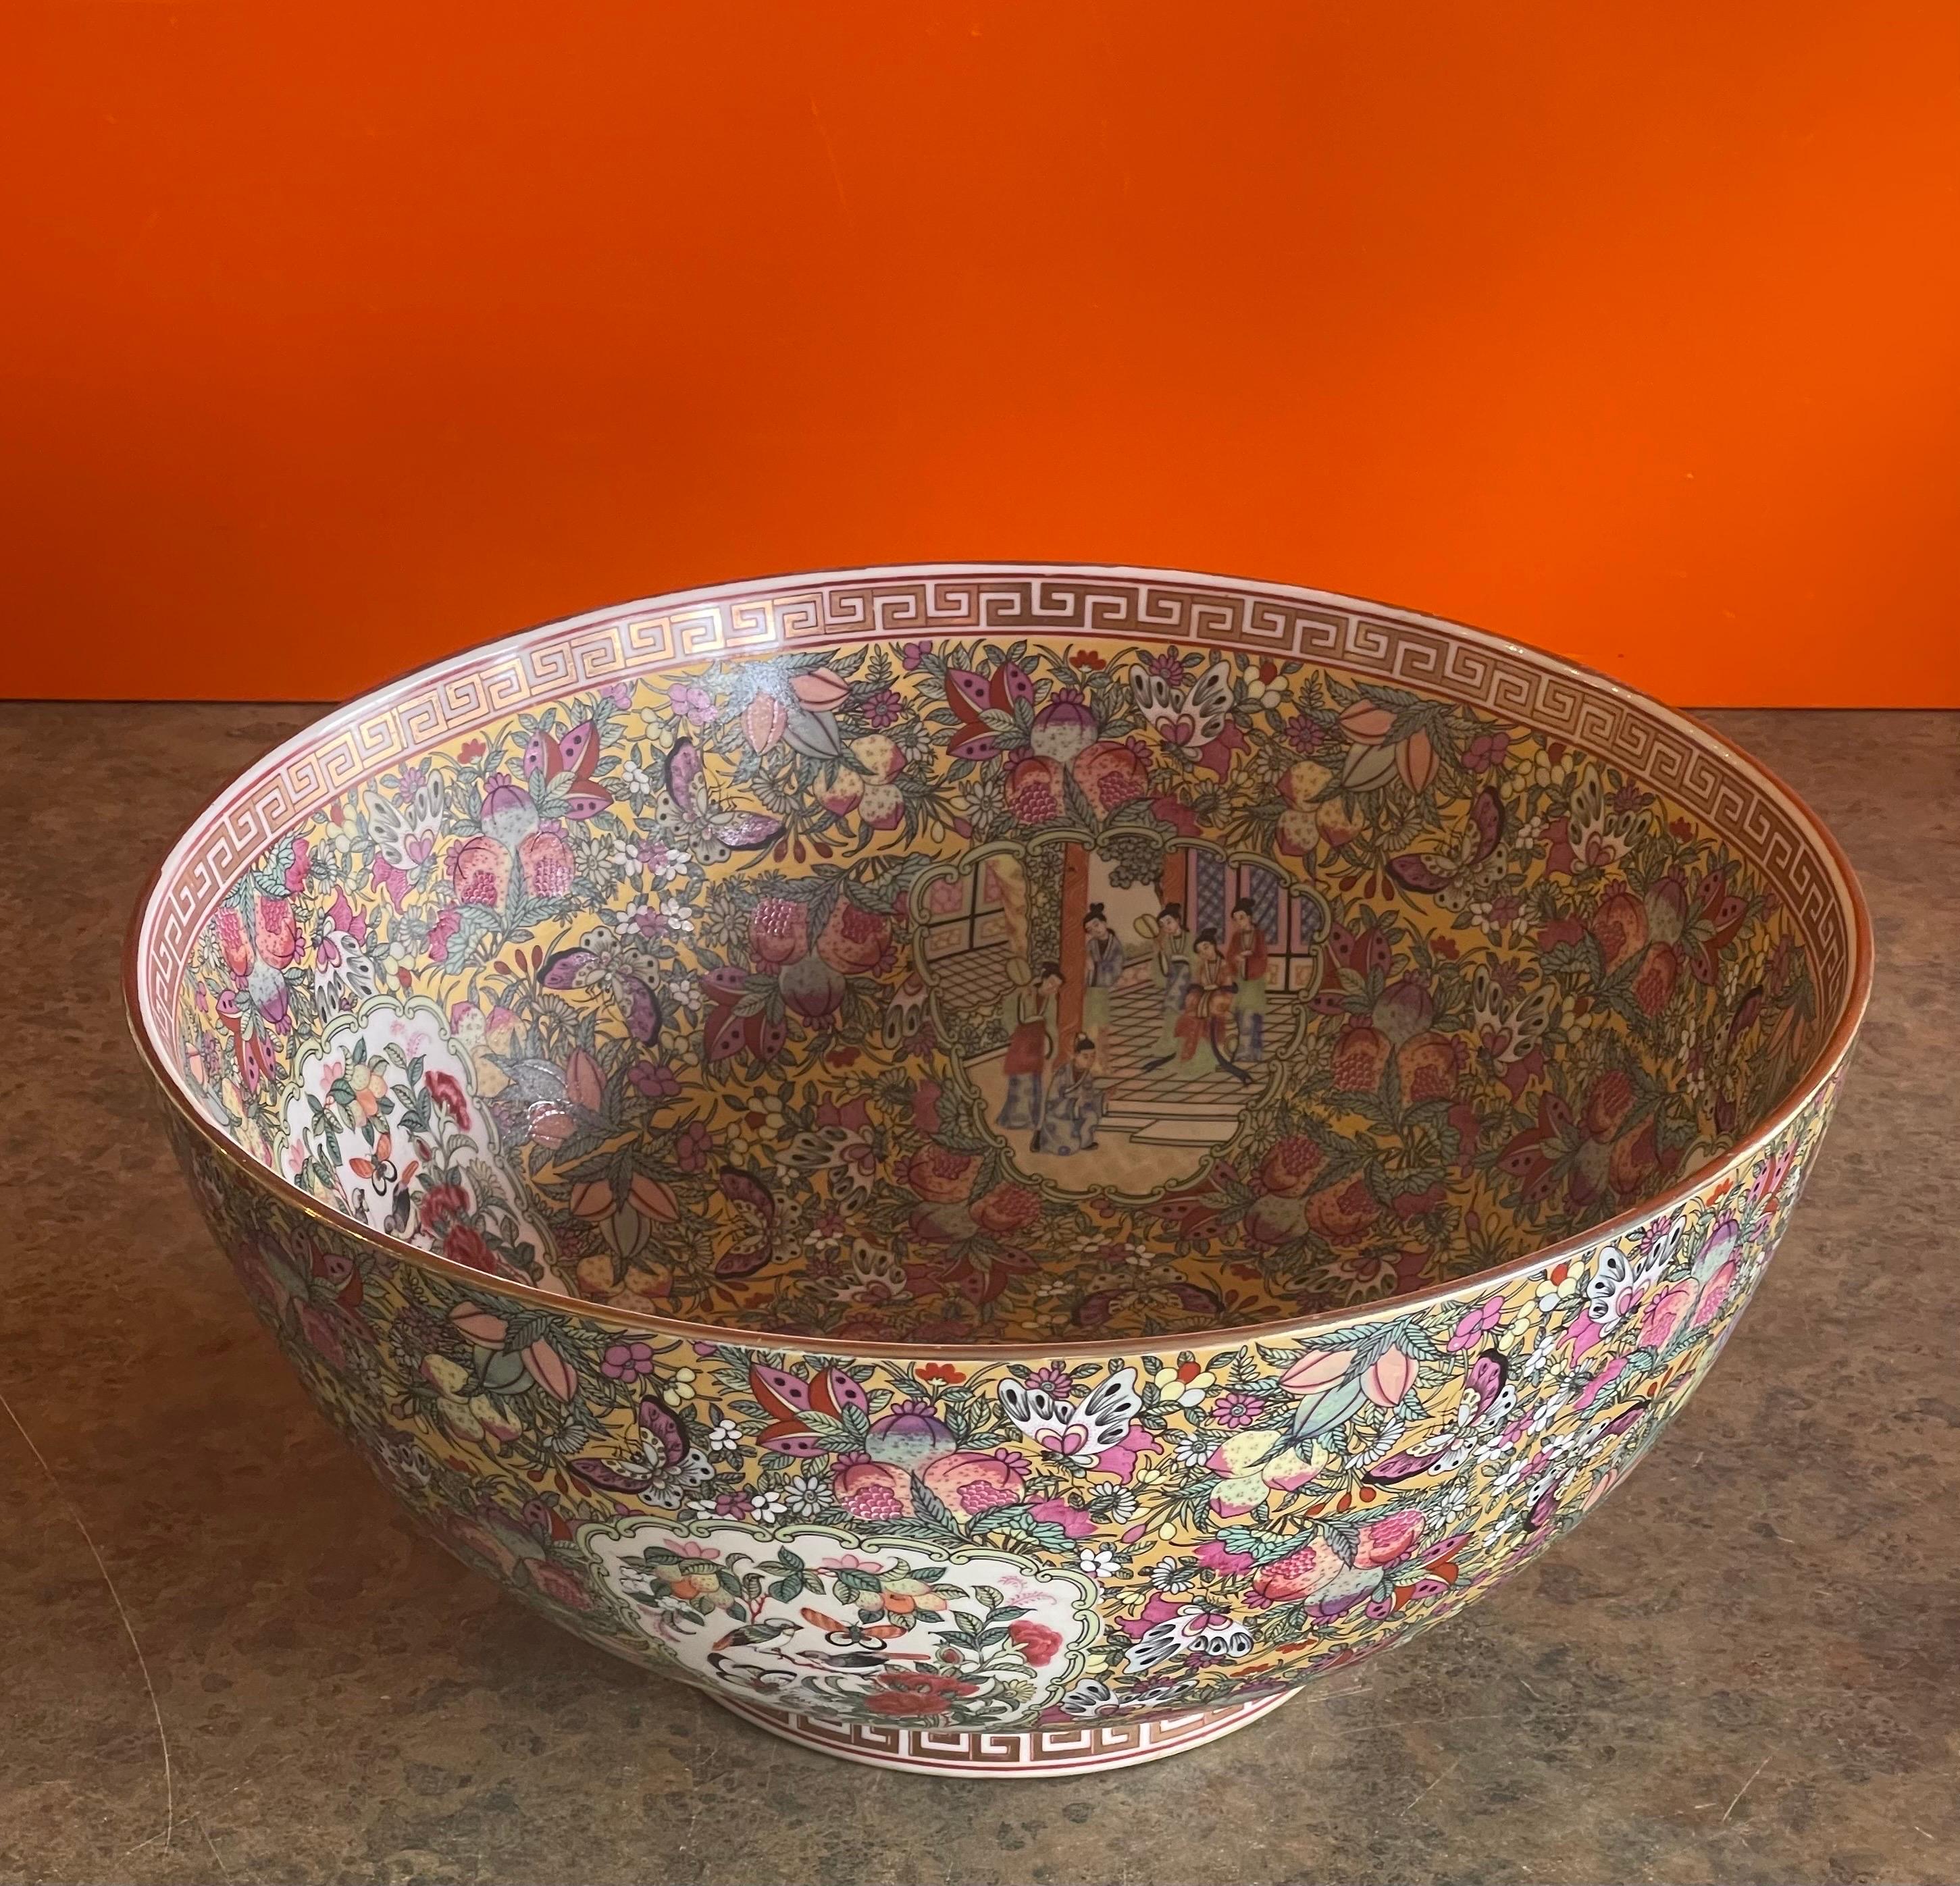 Large Chinese export hand painted rose medallion porcelain bowl, circa early 1950s. This gorgeous bowl has a wonderful traditional design and is in very good vintage condition with no chips or cracks. The piece measures: 14